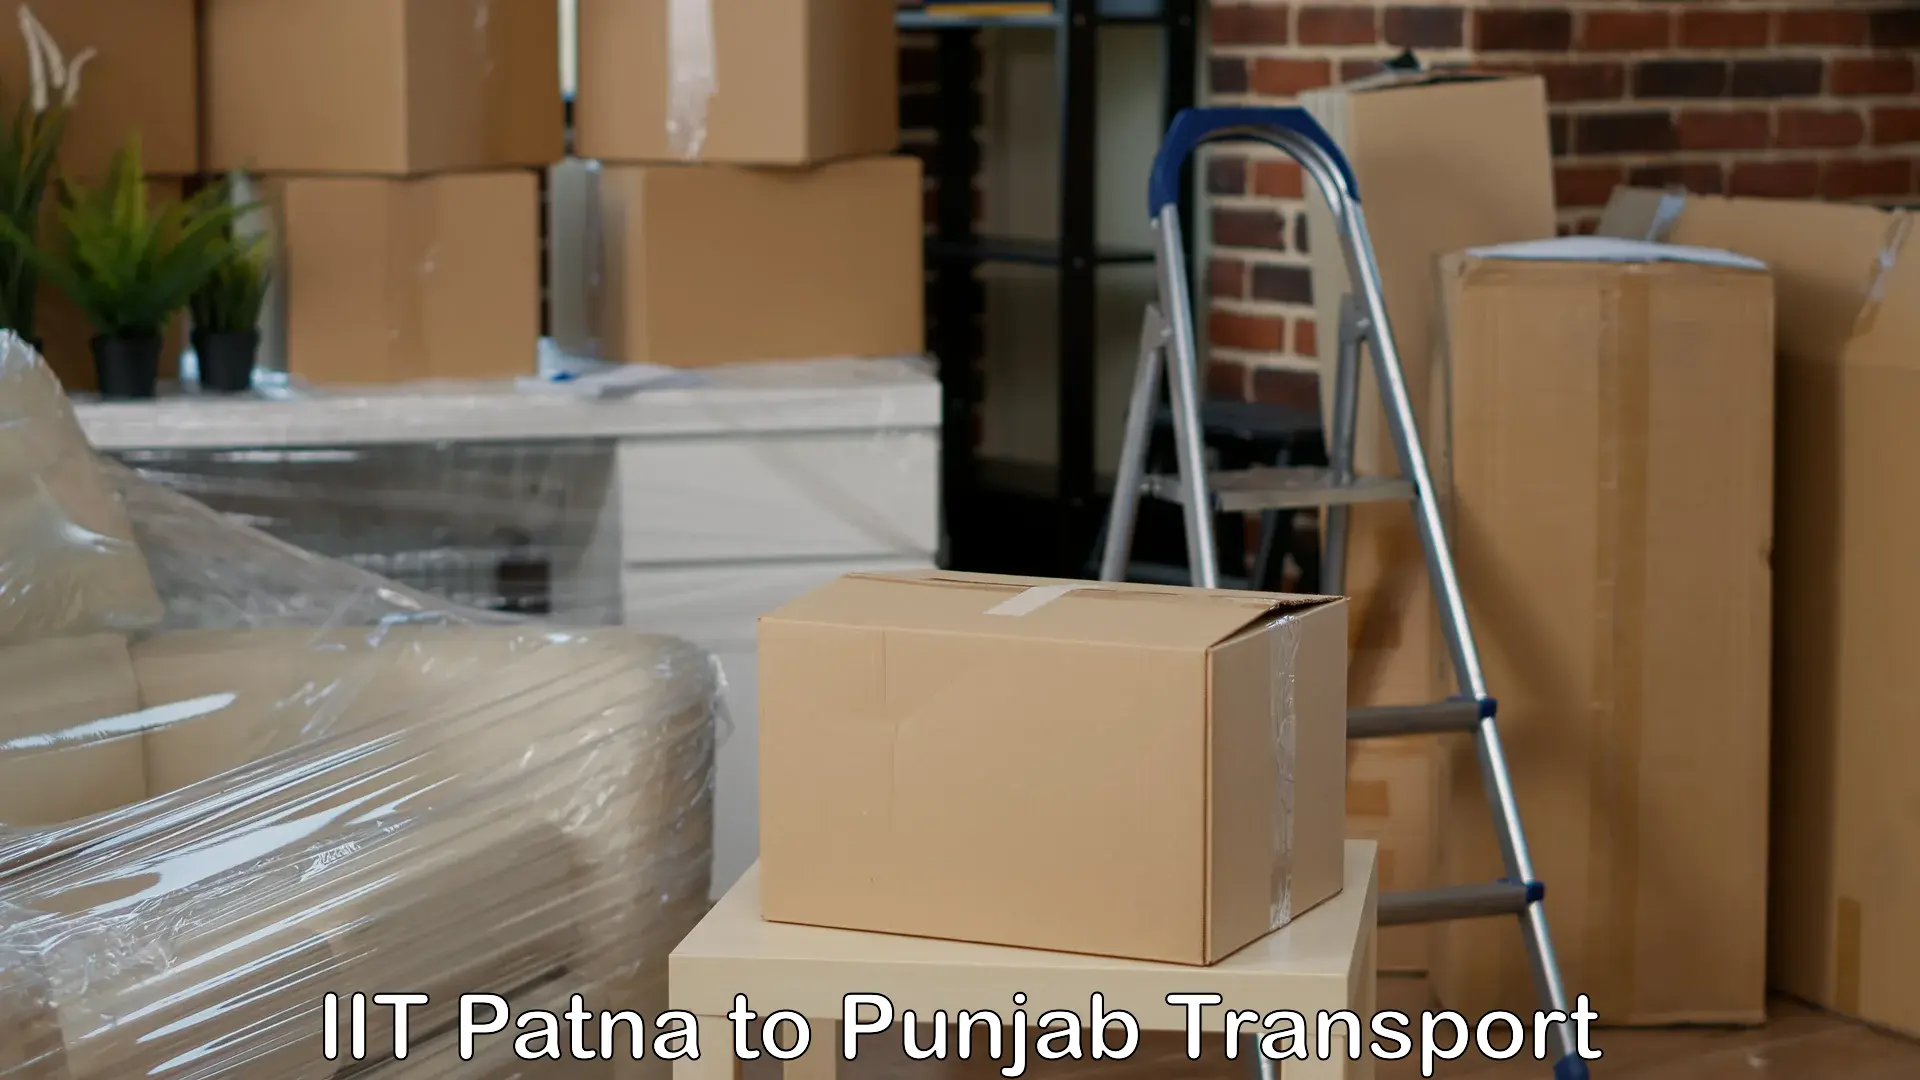 Container transport service IIT Patna to Pathankot